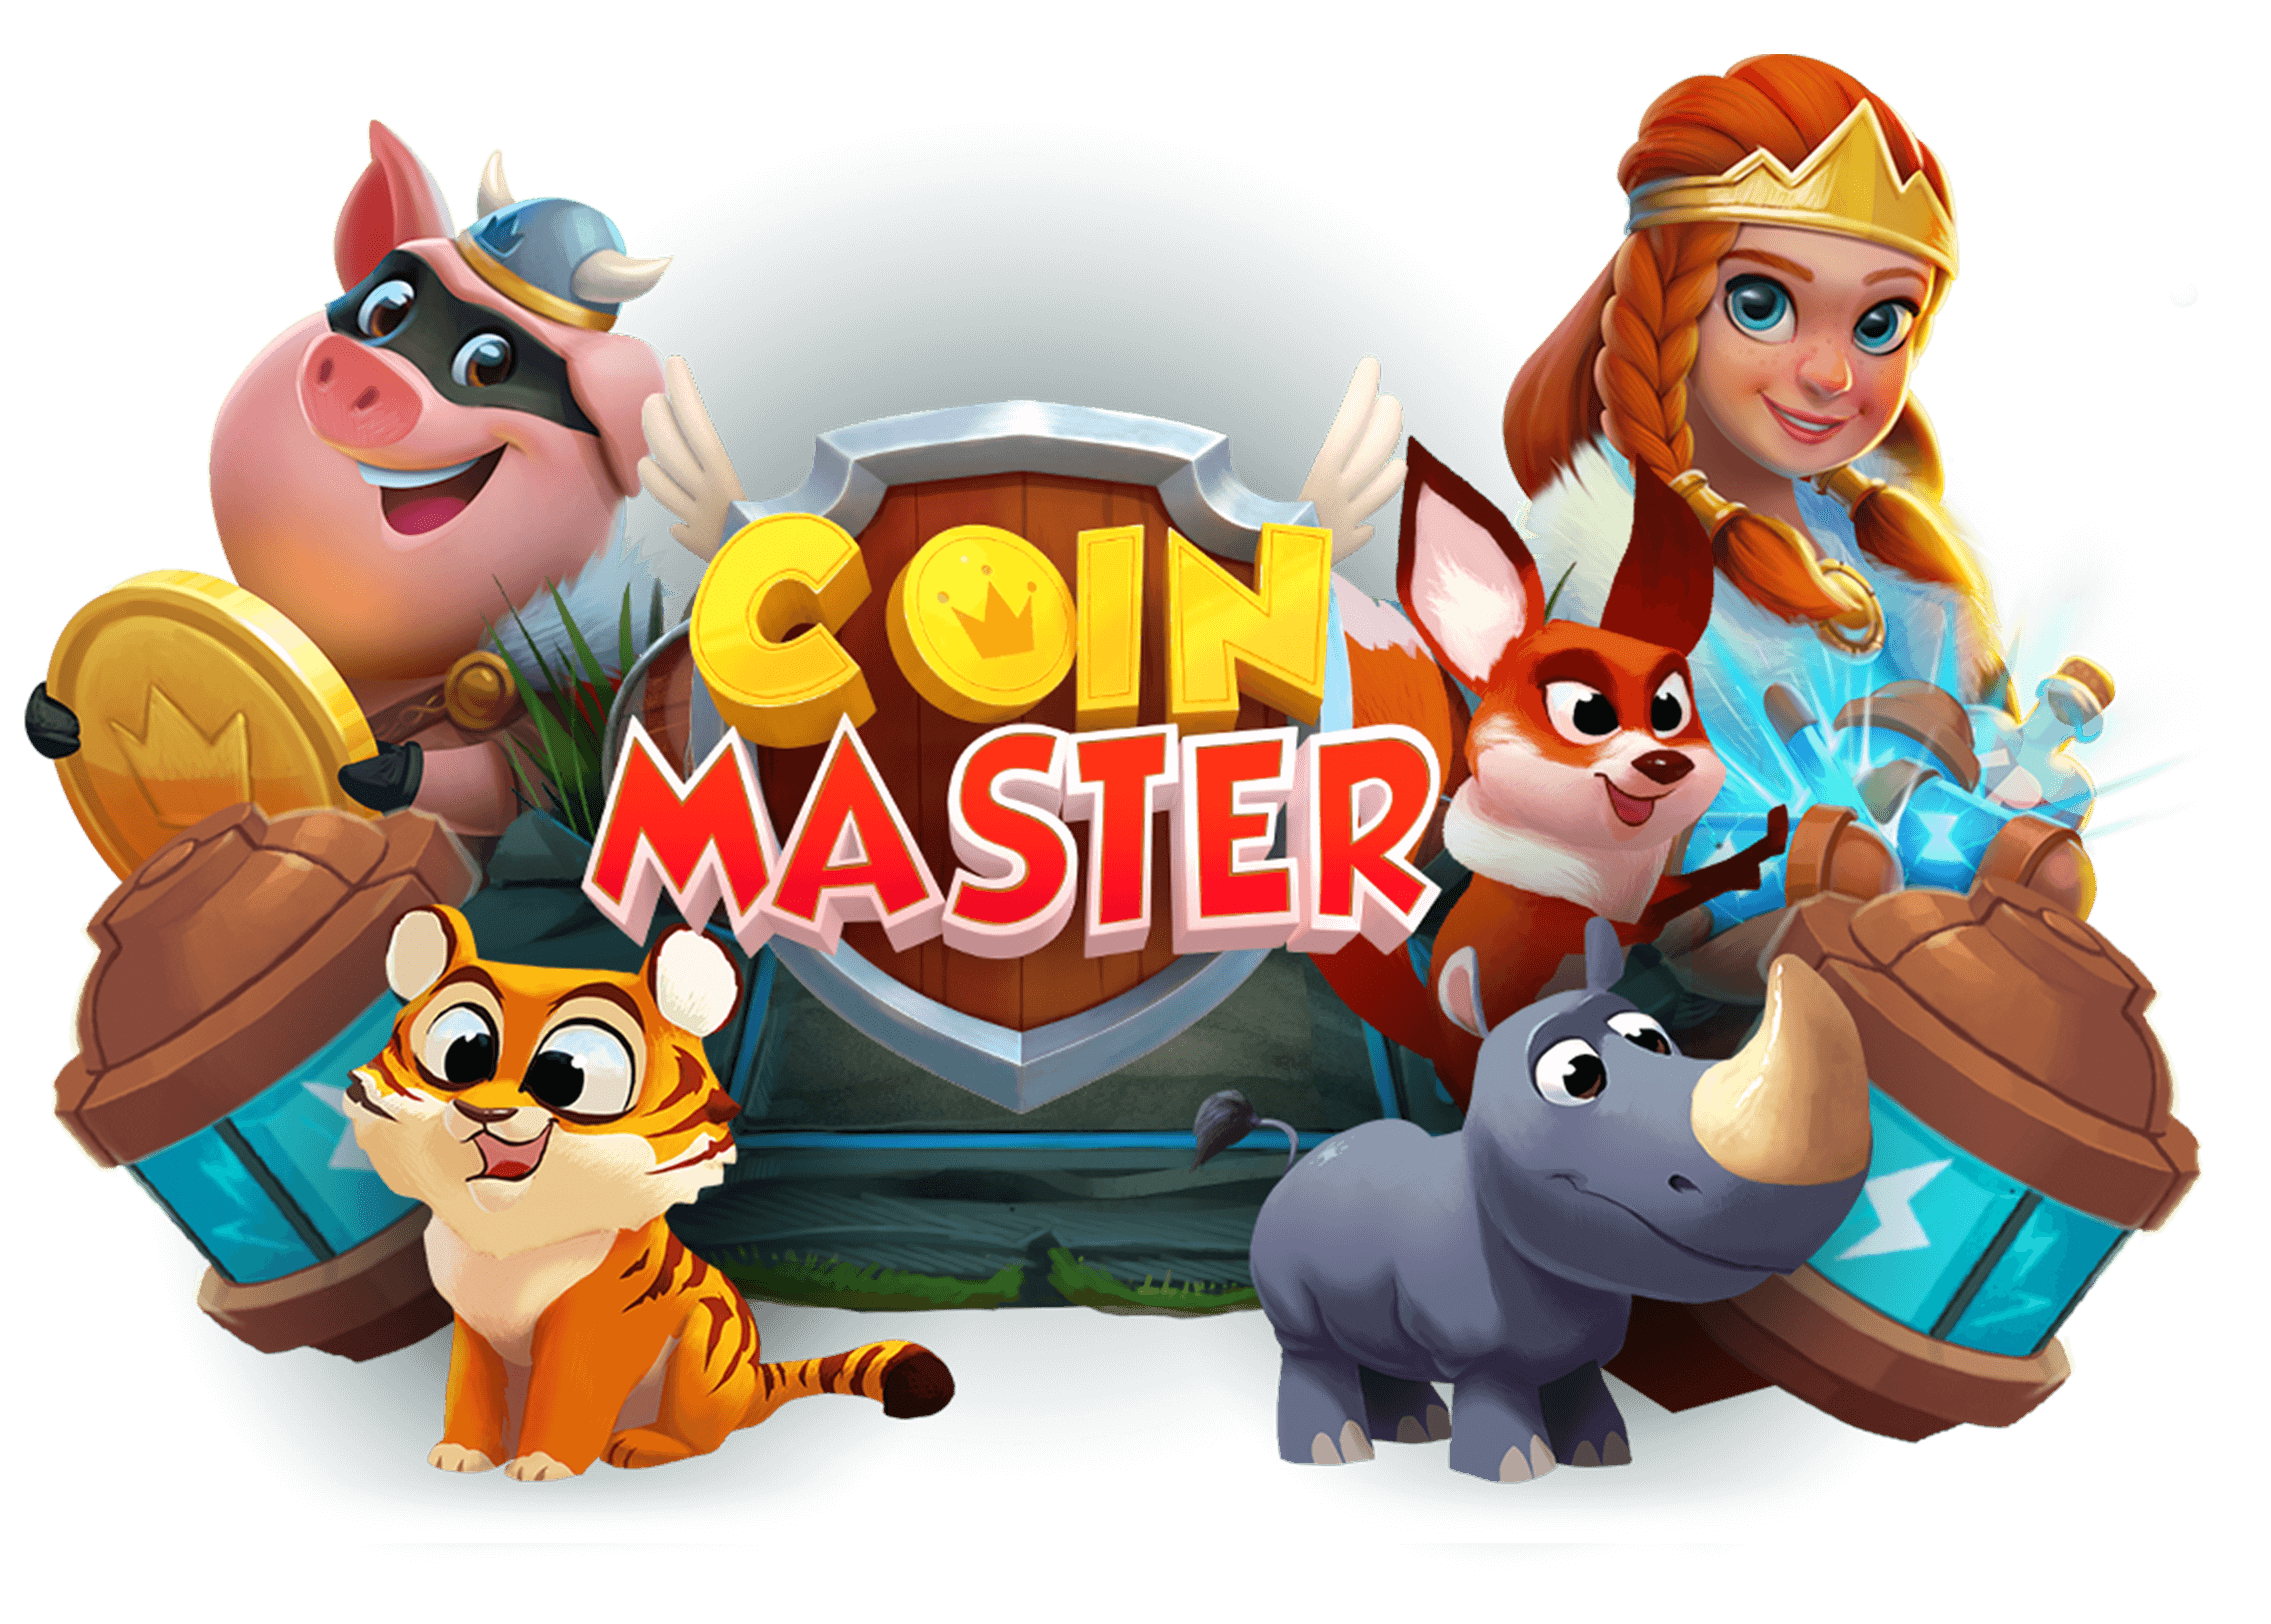 Coin Master Today (24 July) Free Spins and Coins